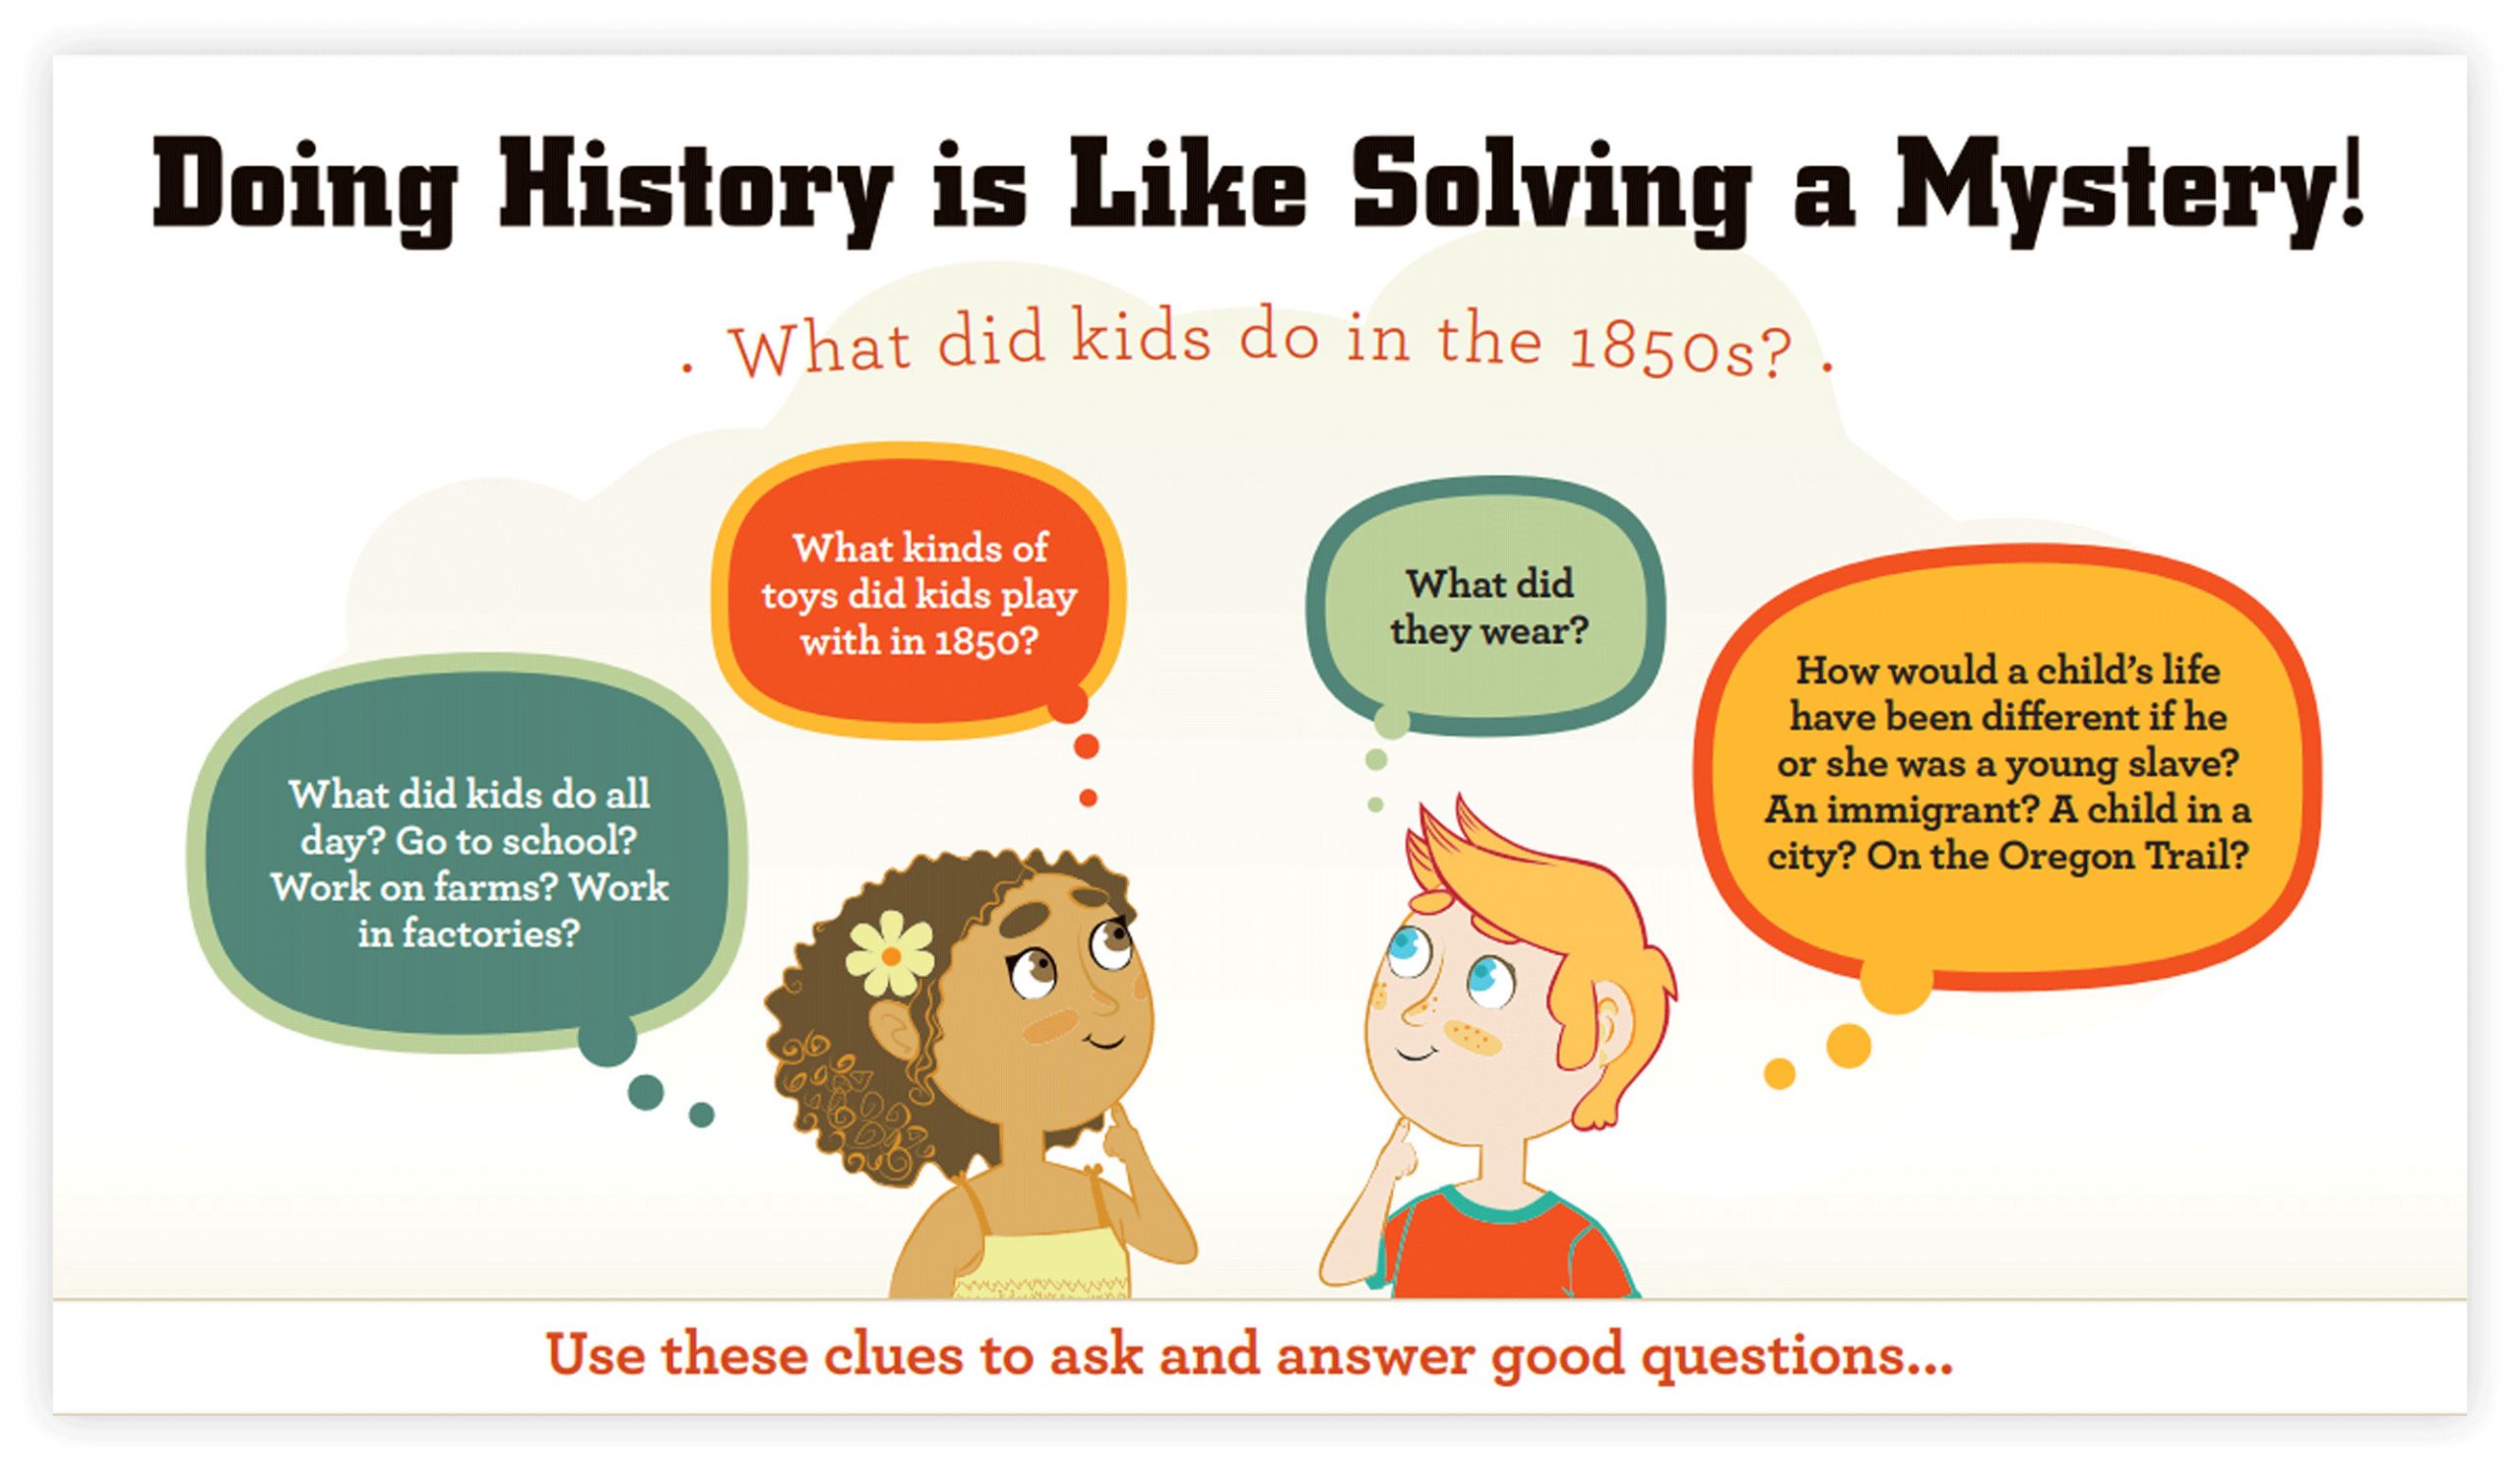 Screengrab from the TeachingHistory.org website which reads, "Doing History is Like Solving a Mystery! What did kids do in the 1850s? Use these clues to ask and answer good questions..."